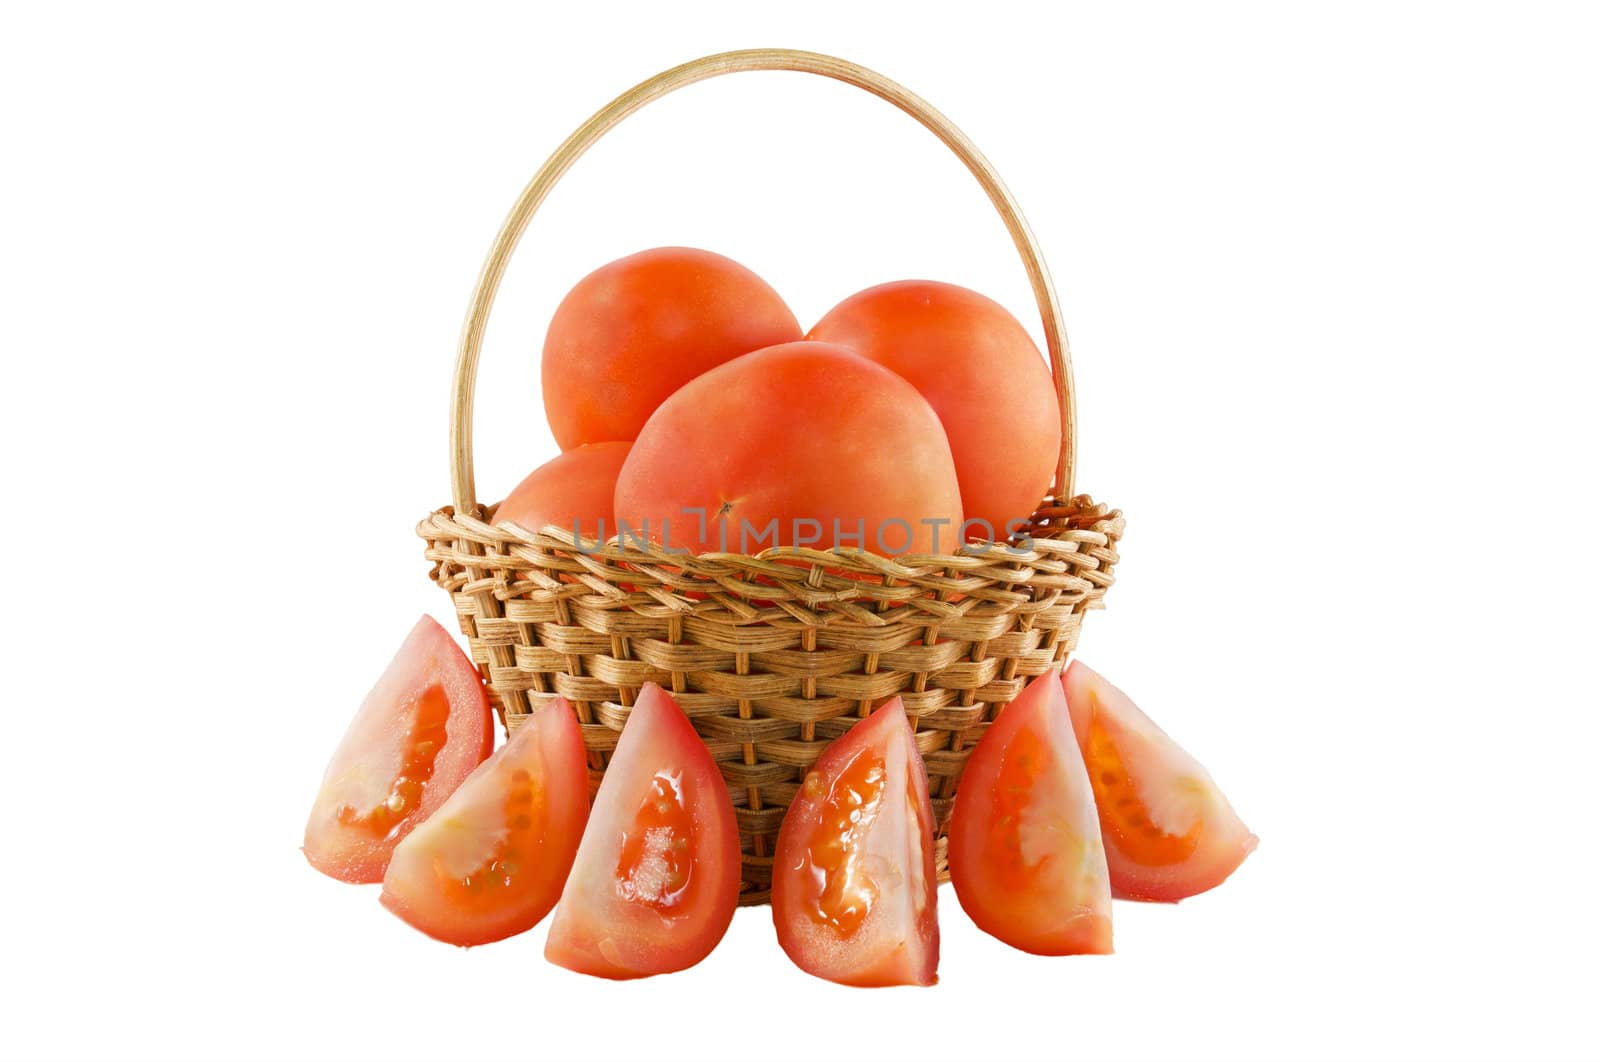 Tomatoes in a basket over white isolated background by HERRAEZ